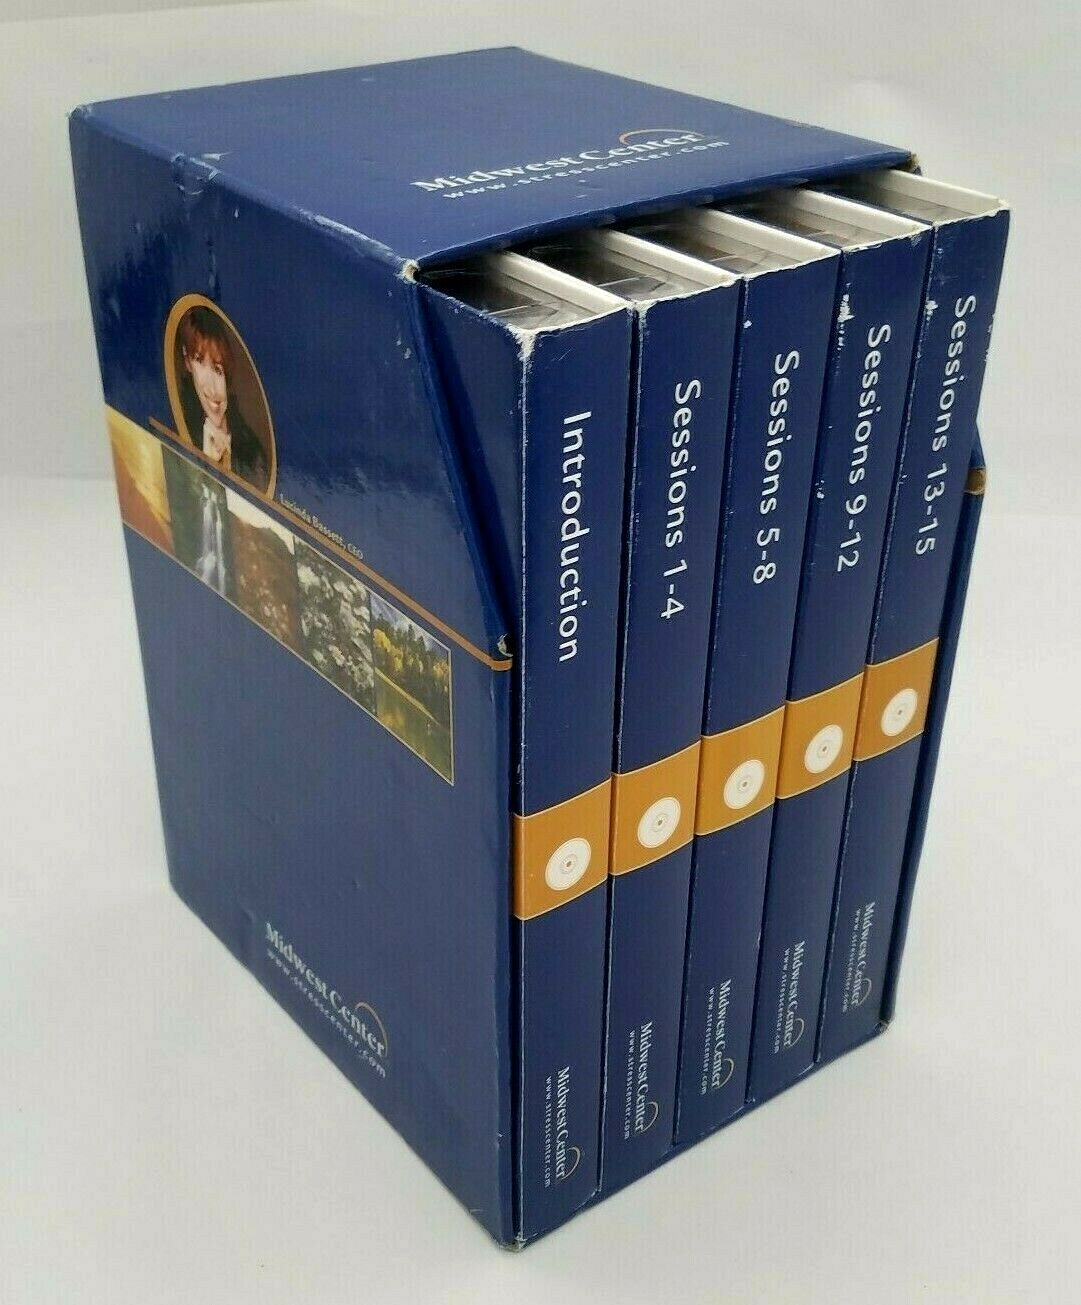 Midwest Center Attacking Anxiety And Depression 15 Session Cd Box Set